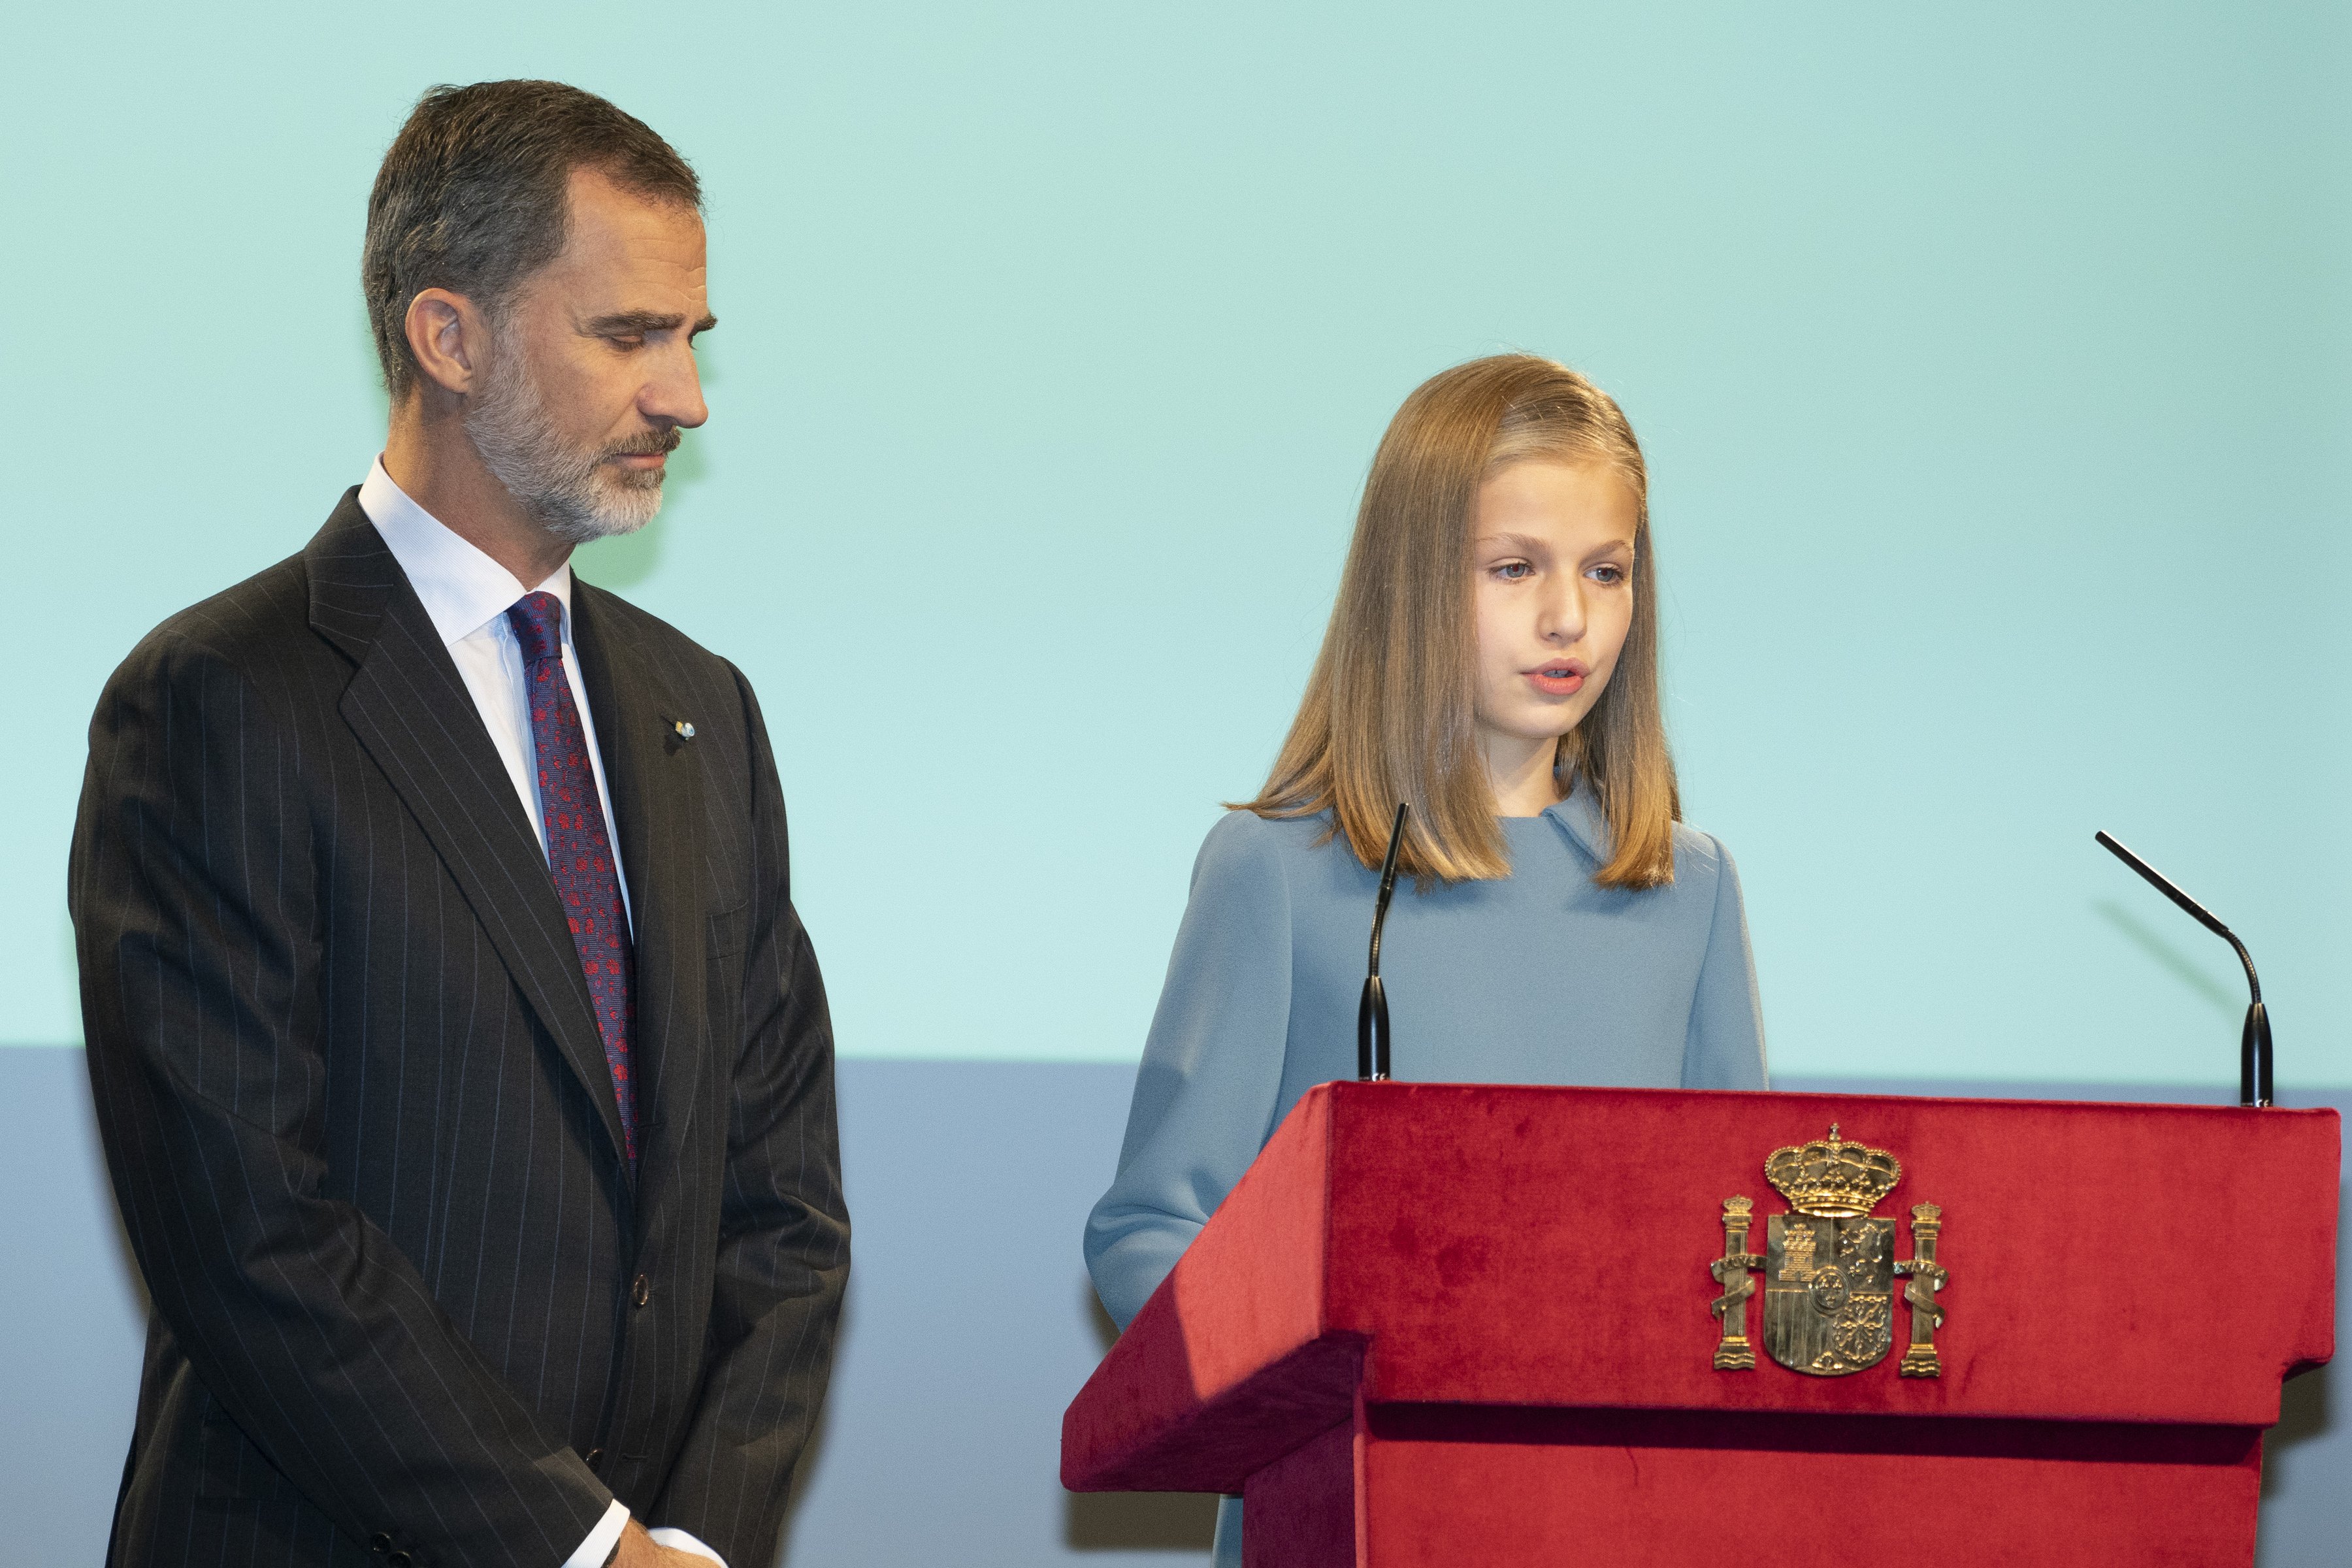 King Felipe VI of Spain and Princess Leonor of Spain at the reading of the Spanish Constitution for the 40th anniversary of its approval by the Congress at the Cervantes Institute on October 31, 2018, in Madrid, Spain | Source: Getty Images